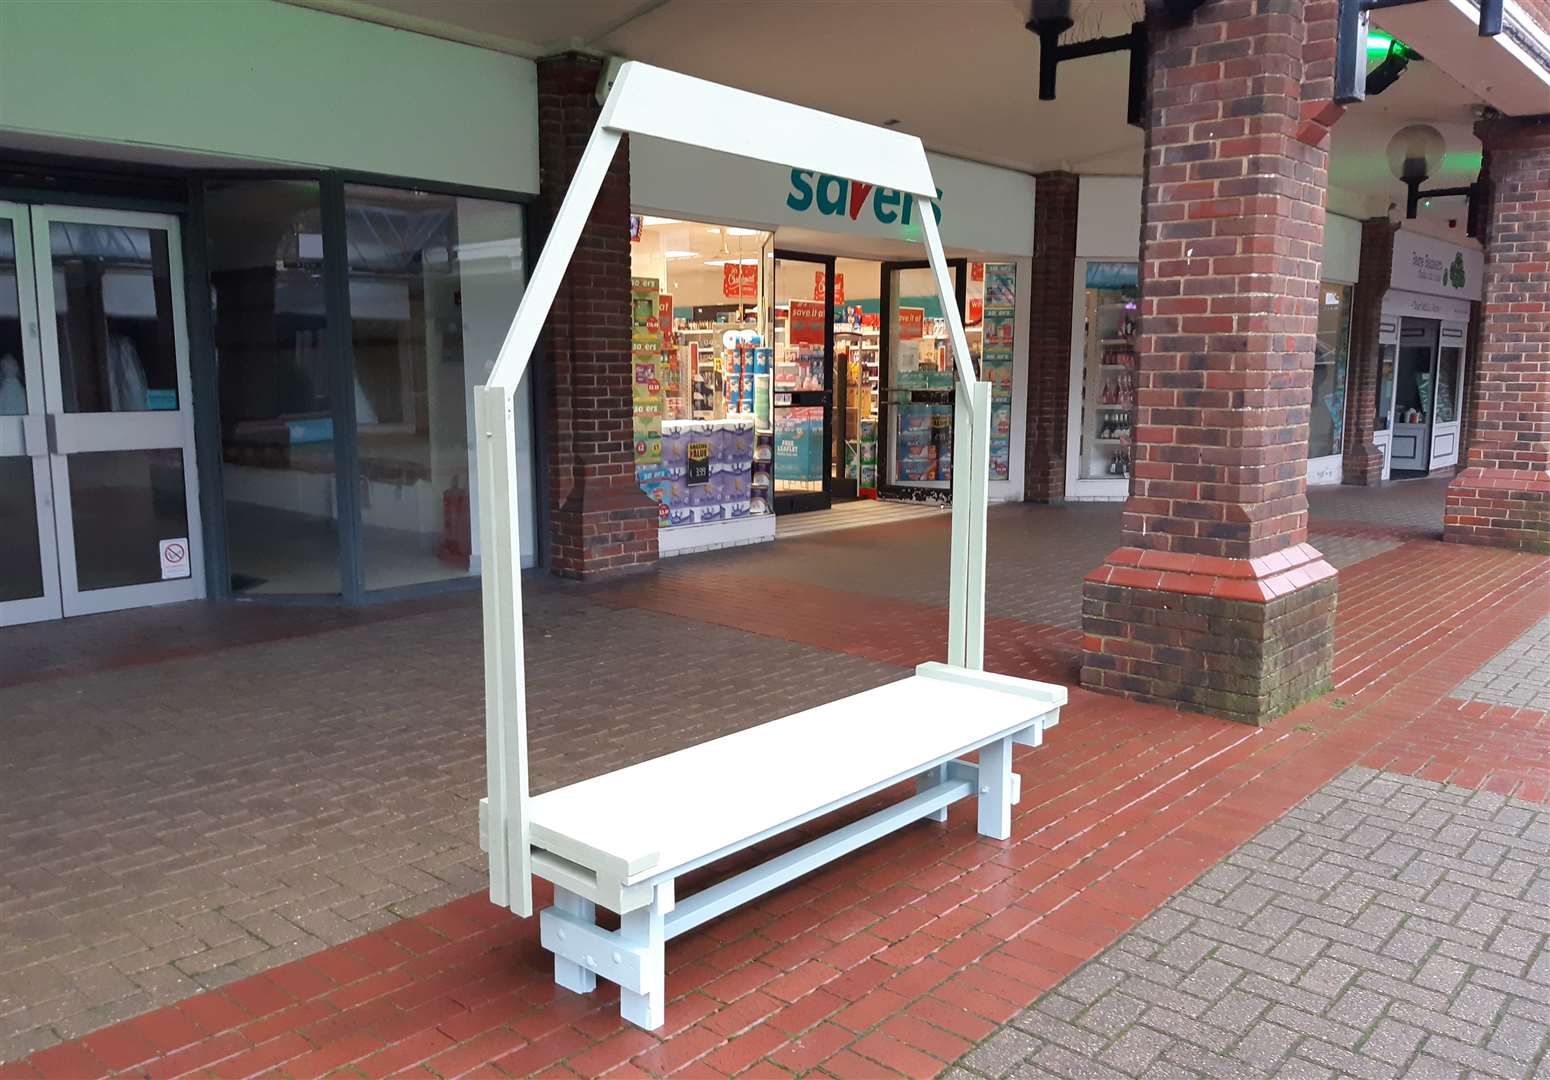 The replacement bench has been installed in the Park Mall shopping centre